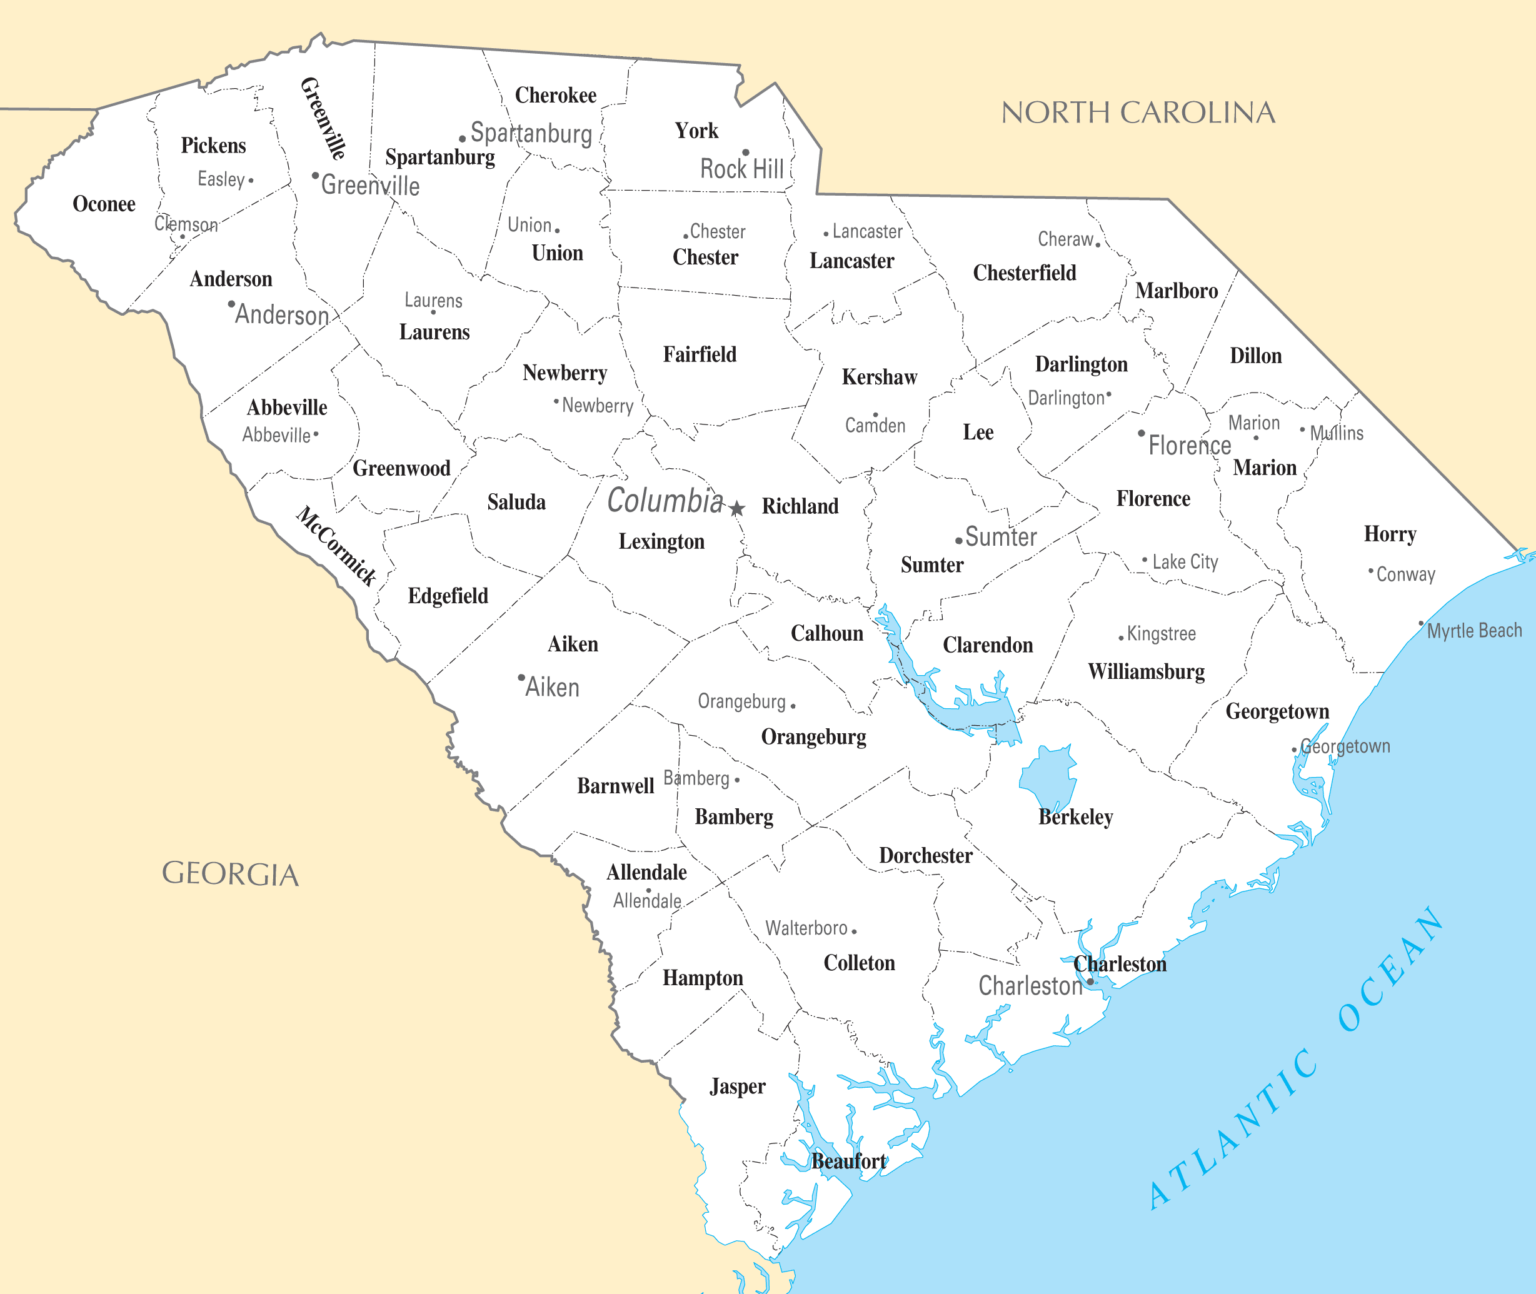 South Carolina Cities And Towns Mapsof Printable Map Of The United States 8136